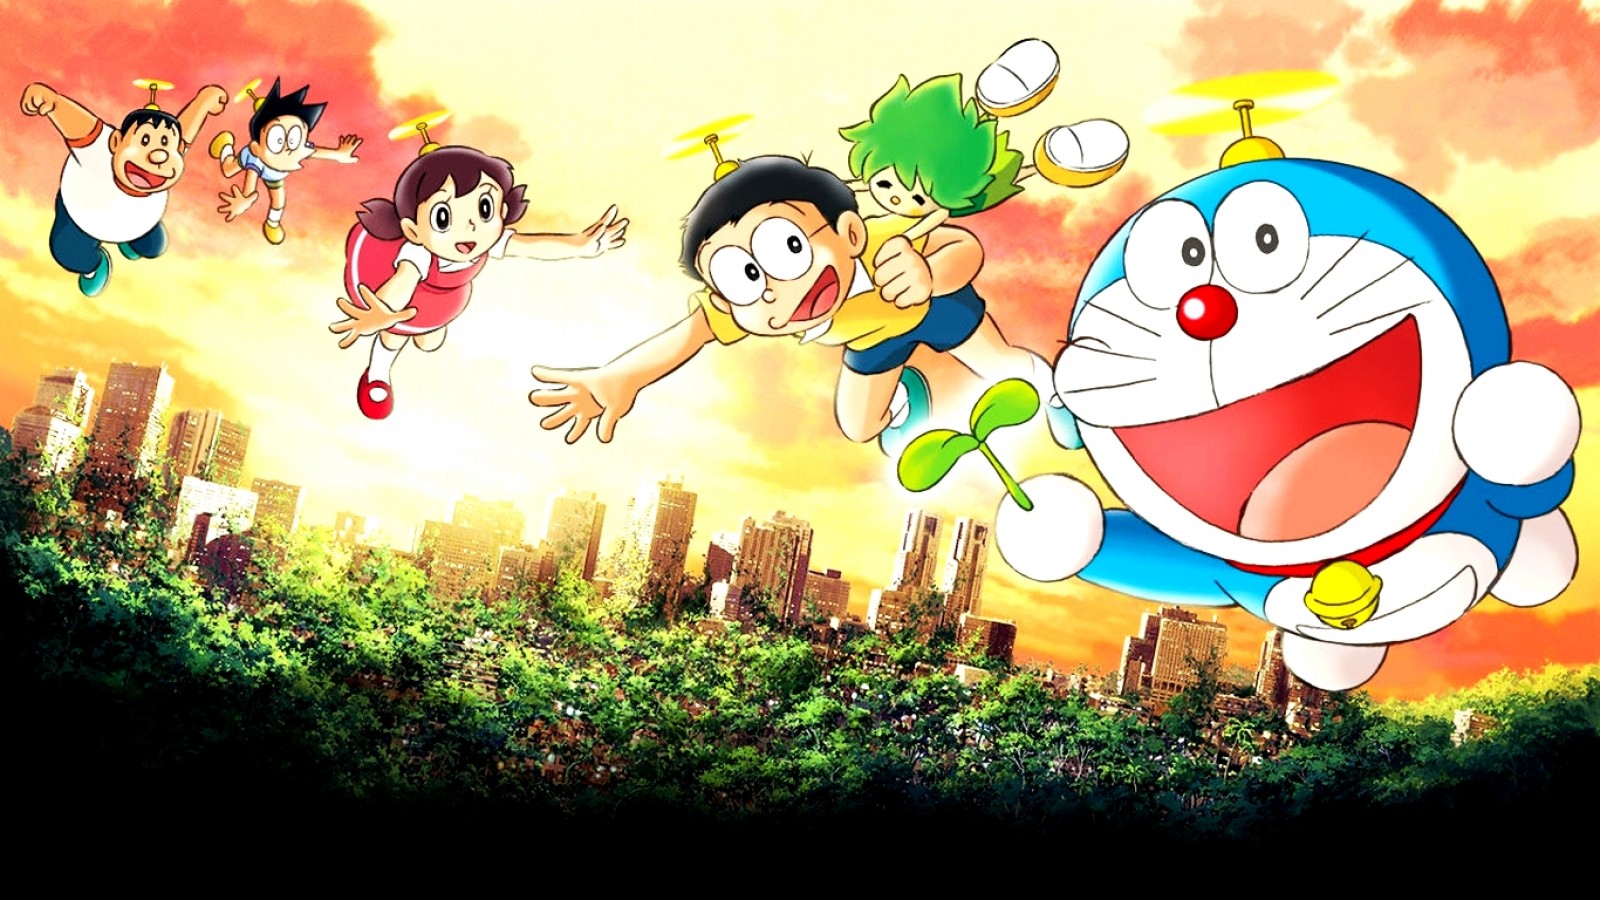 Free Download Doraemon And Friend Hd Pictures Doraemon - Desktop Doraemon  Wallpaper Hd - 1520x855 Wallpaper 